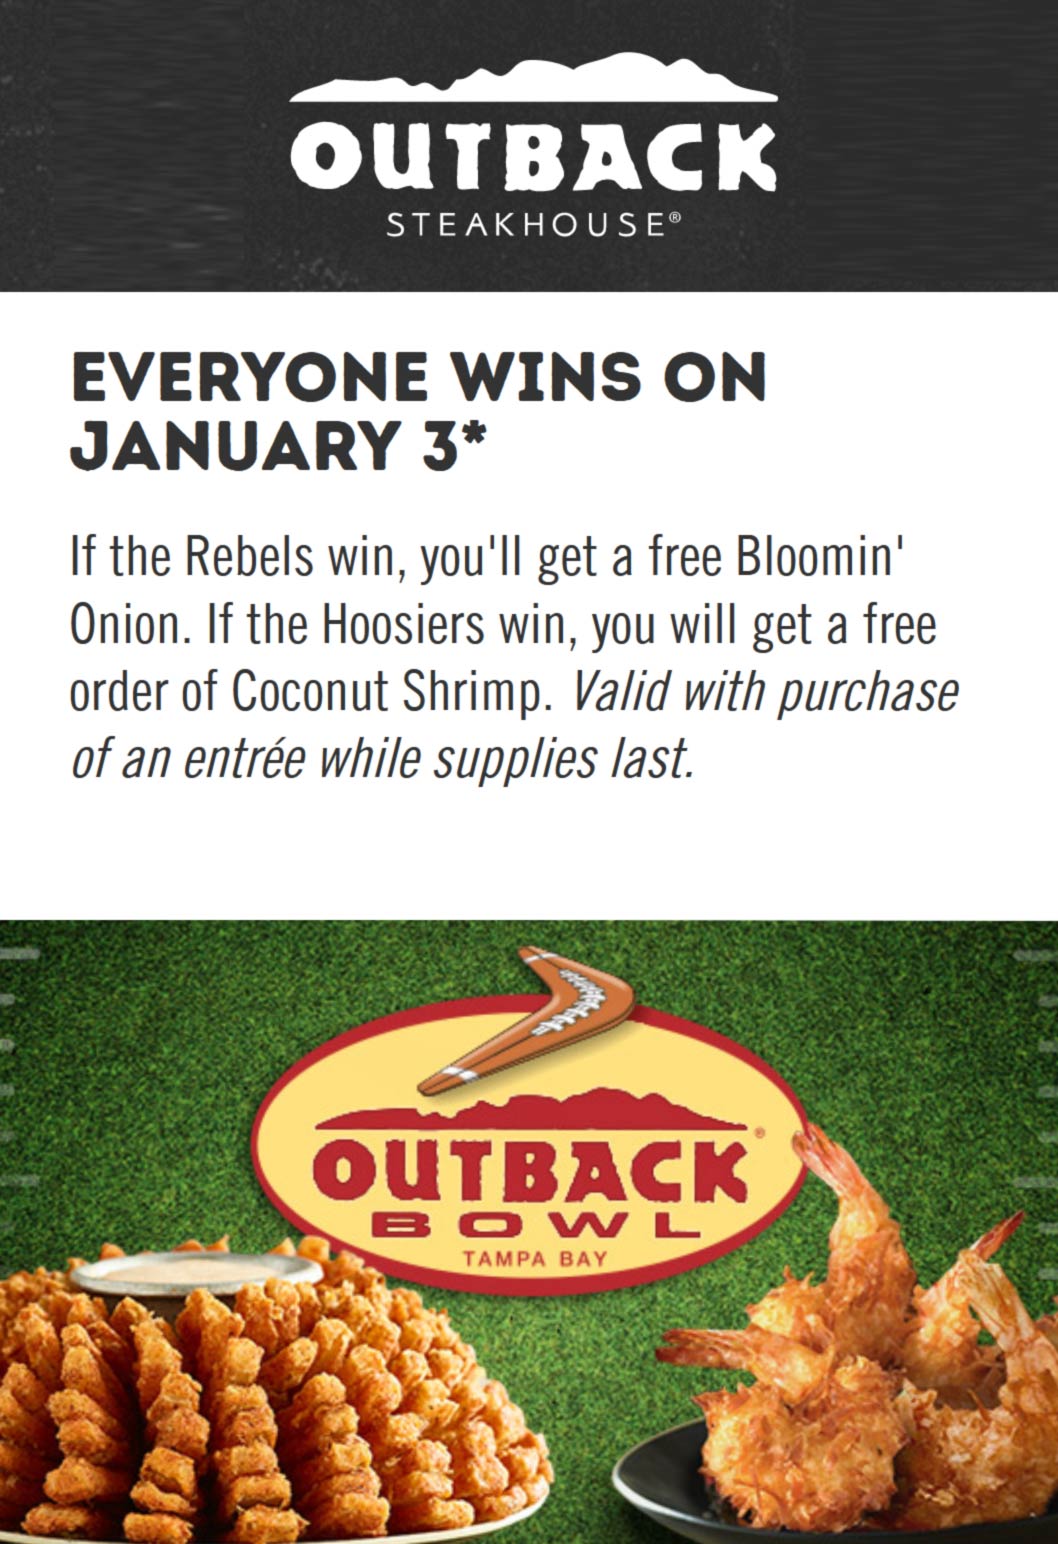 Outback Steakhouse restaurants Coupon  Free bloomin onion or coconut shrimp appetizer Sunday at Outback Steakhouse #outbacksteakhouse 